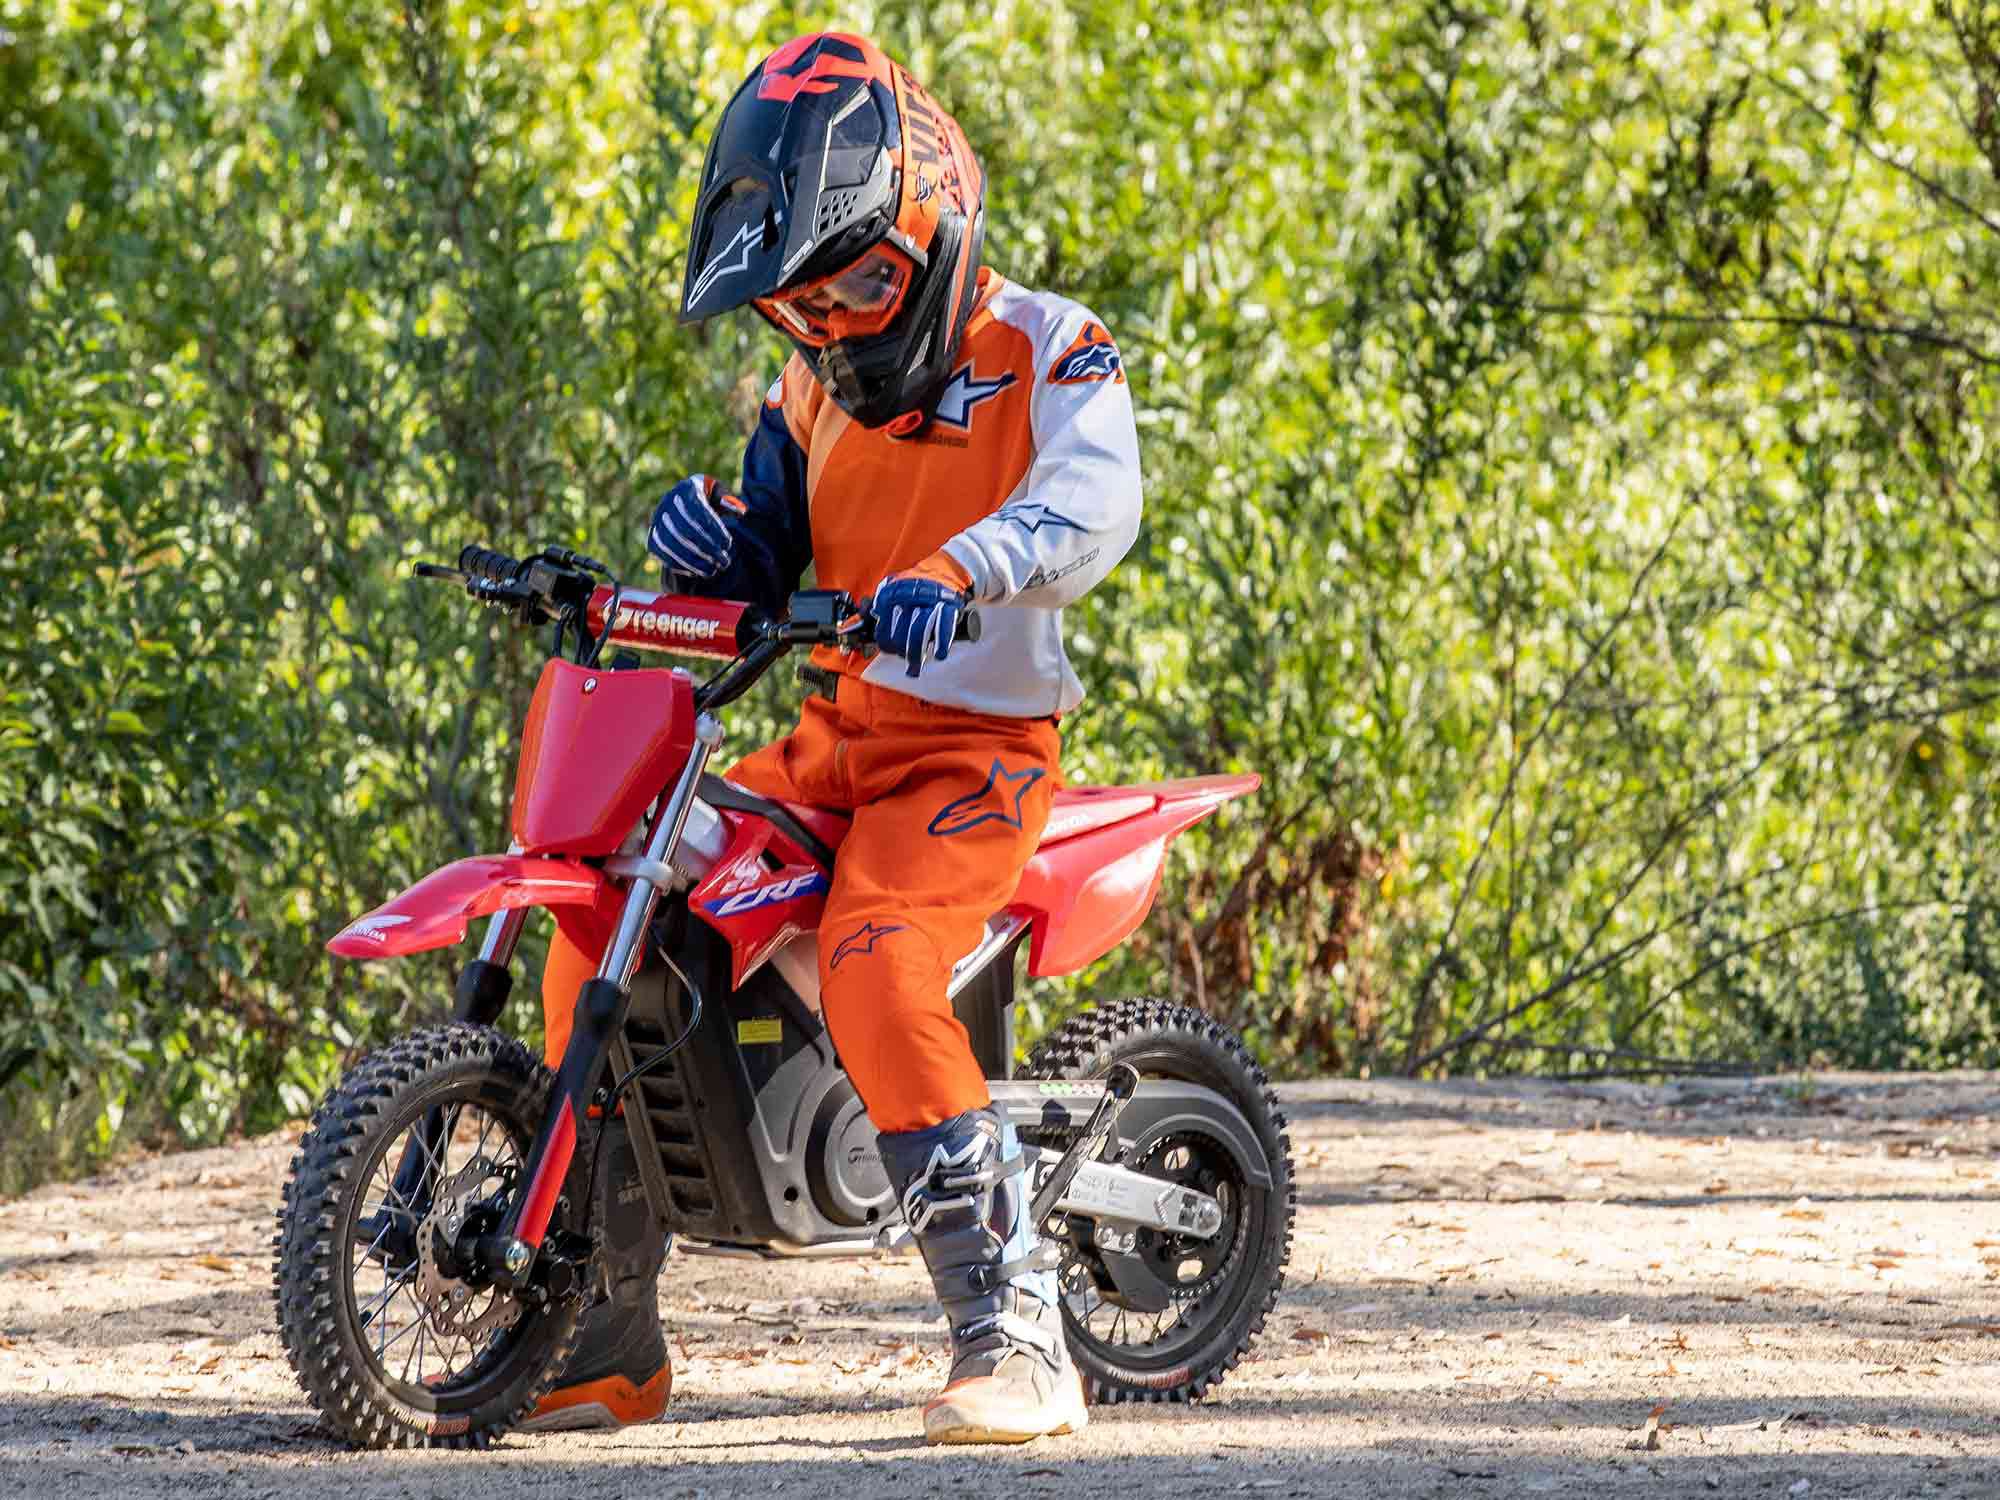 Adjusting output on the CRF-E2 takes only a few button pushes, and navigating the simple options is intuitive. The display includes a speedometer.